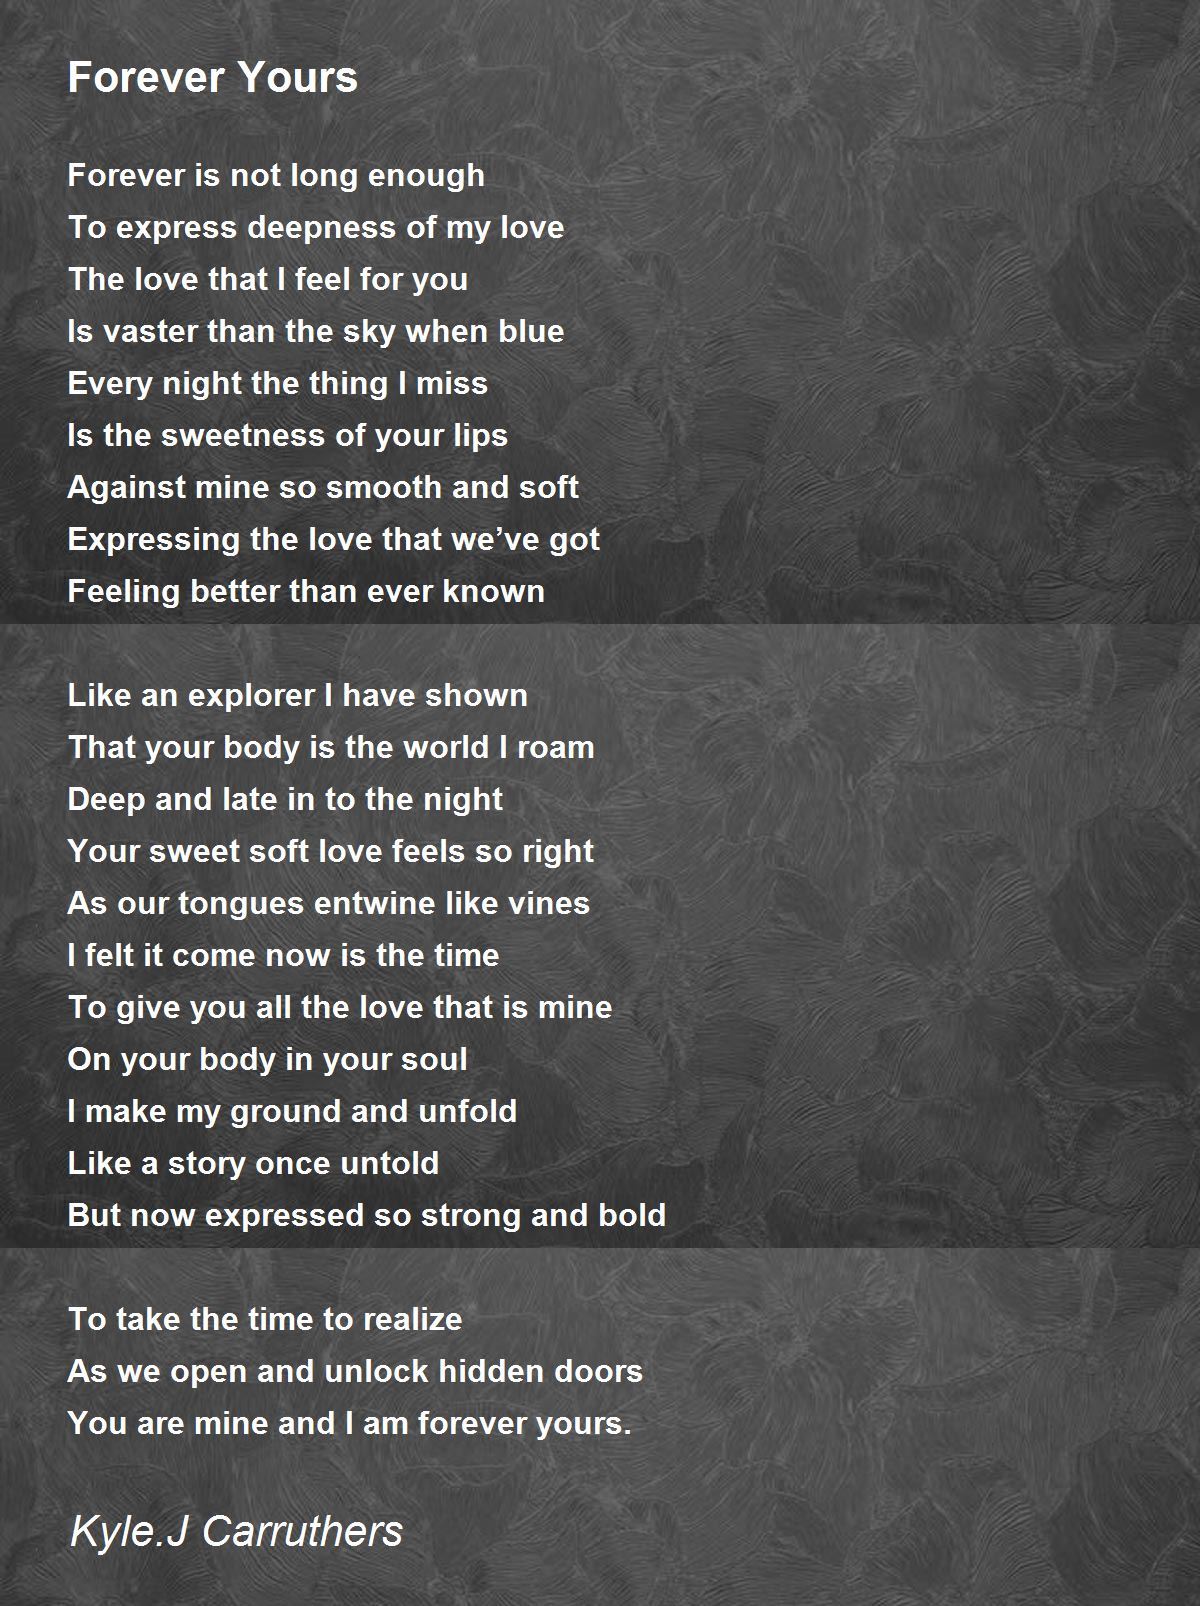 Forever Yours - Forever Yours Poem by Kyle.J Carruthers